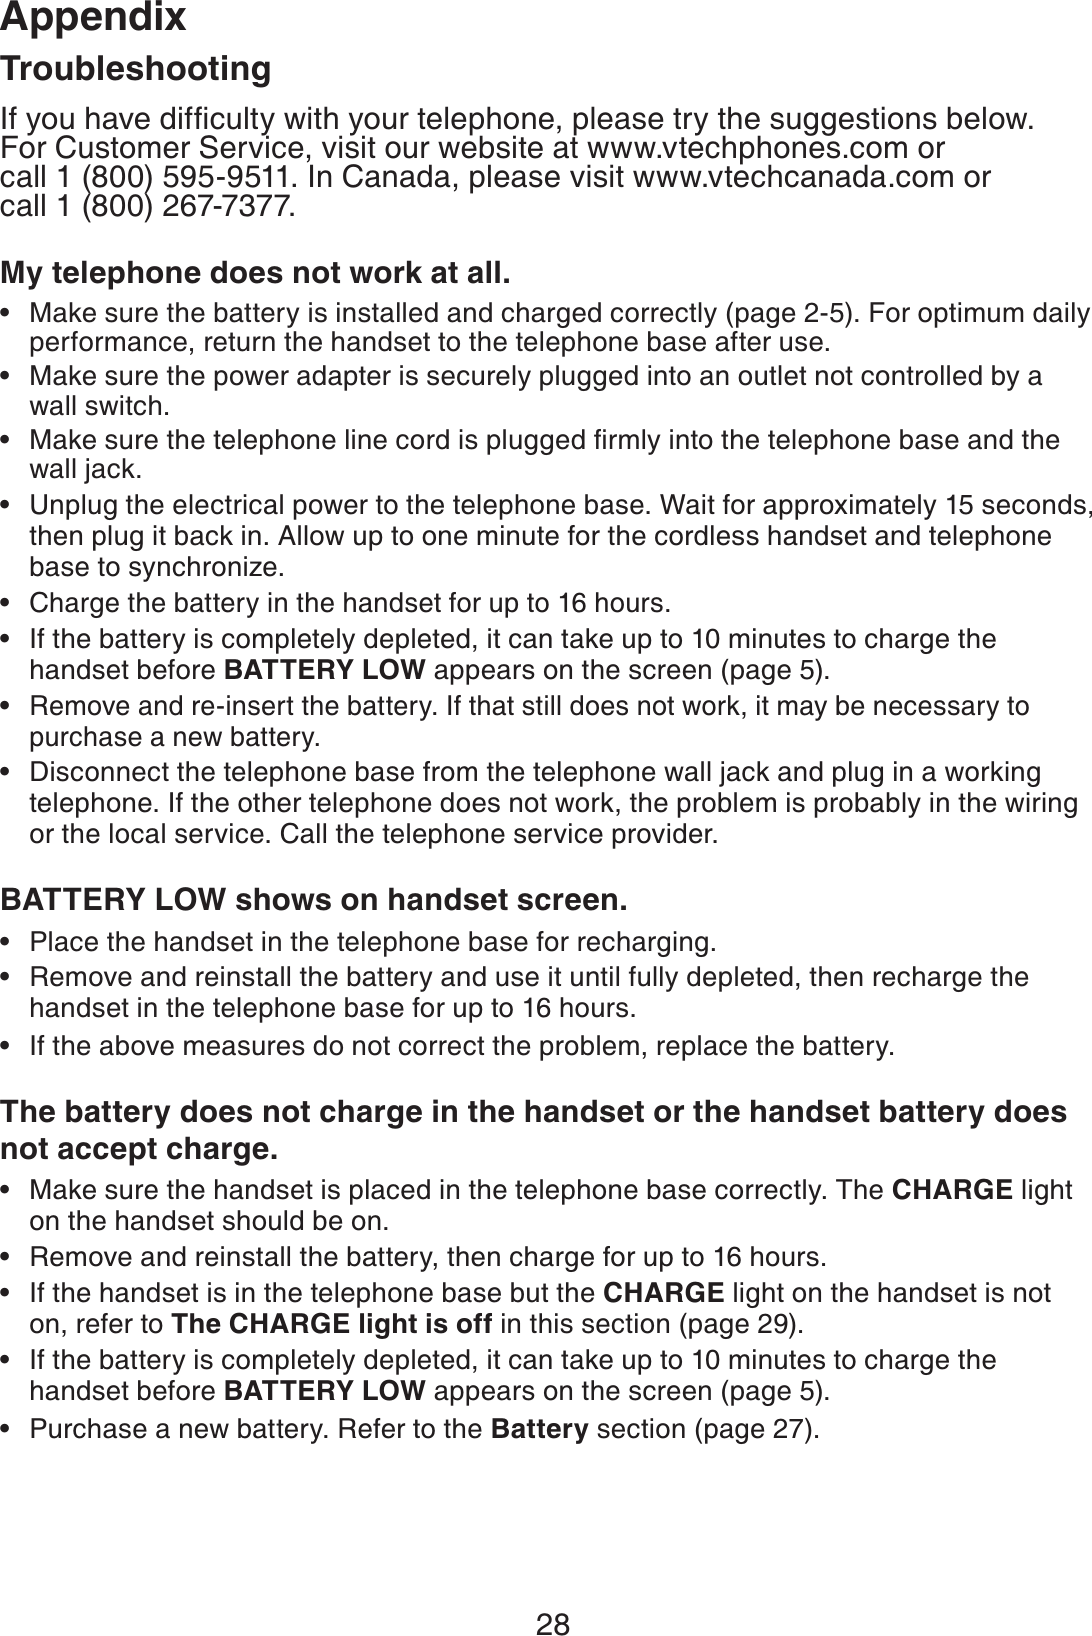 28AppendixTroubleshootingIf you have difﬁculty with your telephone, please try the suggestions below.  For Customer Service, visit our website at www.vtechphones.com or    call 1 (800) 595-9511. In Canada, please visit www.vtechcanada.com or  call 1 (800) 267-7377.My telephone does not work at all.Make sure the battery is installed and charged correctly (page 2-5). For optimum daily performance, return the handset to the telephone base after use.Make sure the power adapter is securely plugged into an outlet not controlled by a wall switch.Make sure the telephone line cord is plugged ﬁrmly into the telephone base and the wall jack.Unplug the electrical power to the telephone base. Wait for approximately 15 seconds, then plug it back in. Allow up to one minute for the cordless handset and telephone base to synchronize.Charge the battery in the handset for up to 16 hours.If the battery is completely depleted, it can take up to 10 minutes to charge the handset before BATTERY LOW appears on the screen (page 5).Remove and re-insert the battery. If that still does not work, it may be necessary to purchase a new battery.Disconnect the telephone base from the telephone wall jack and plug in a working telephone. If the other telephone does not work, the problem is probably in the wiring or the local service. Call the telephone service provider.BATTERY LOW shows on handset screen.Place the handset in the telephone base for recharging.Remove and reinstall the battery and use it until fully depleted, then recharge the handset in the telephone base for up to 16 hours.If the above measures do not correct the problem, replace the battery.The battery does not charge in the handset or the handset battery does not accept charge.Make sure the handset is placed in the telephone base correctly. The CHARGE light on the handset should be on.Remove and reinstall the battery, then charge for up to 16 hours.If the handset is in the telephone base but the CHARGE light on the handset is not on, refer to The CHARGE light is off in this section (page 29).If the battery is completely depleted, it can take up to 10 minutes to charge the handset before BATTERY LOW appears on the screen (page 5).Purchase a new battery. Refer to the Battery section (page 27).••••••••••••••••